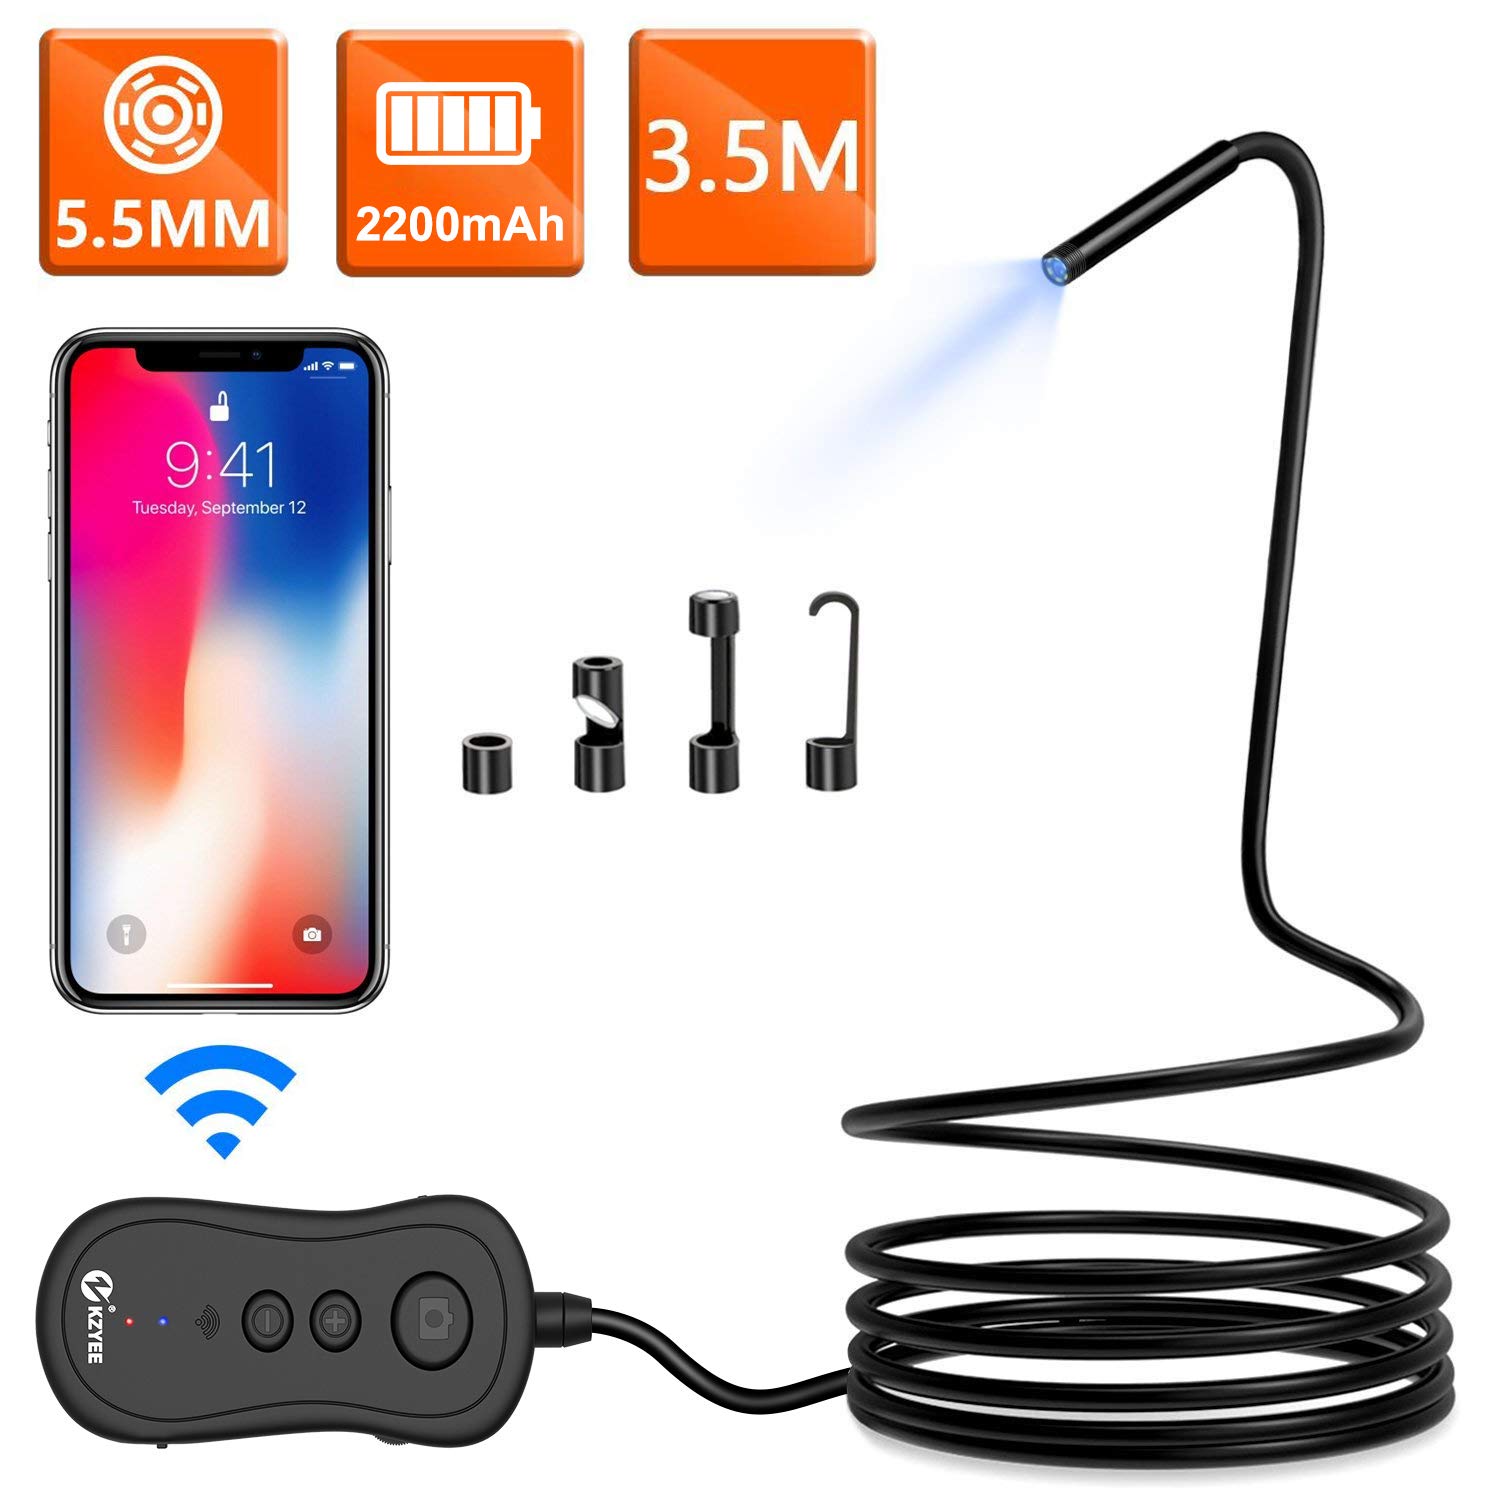 KZYEE 5.5mm 2.0MP 1080P HD Zoom WiFi Borescope Wireless Endoscope 11.5FT 2200mAh Semi-Rigid Snake Inspection Camera for Android & iOS Smartphone Tablet 